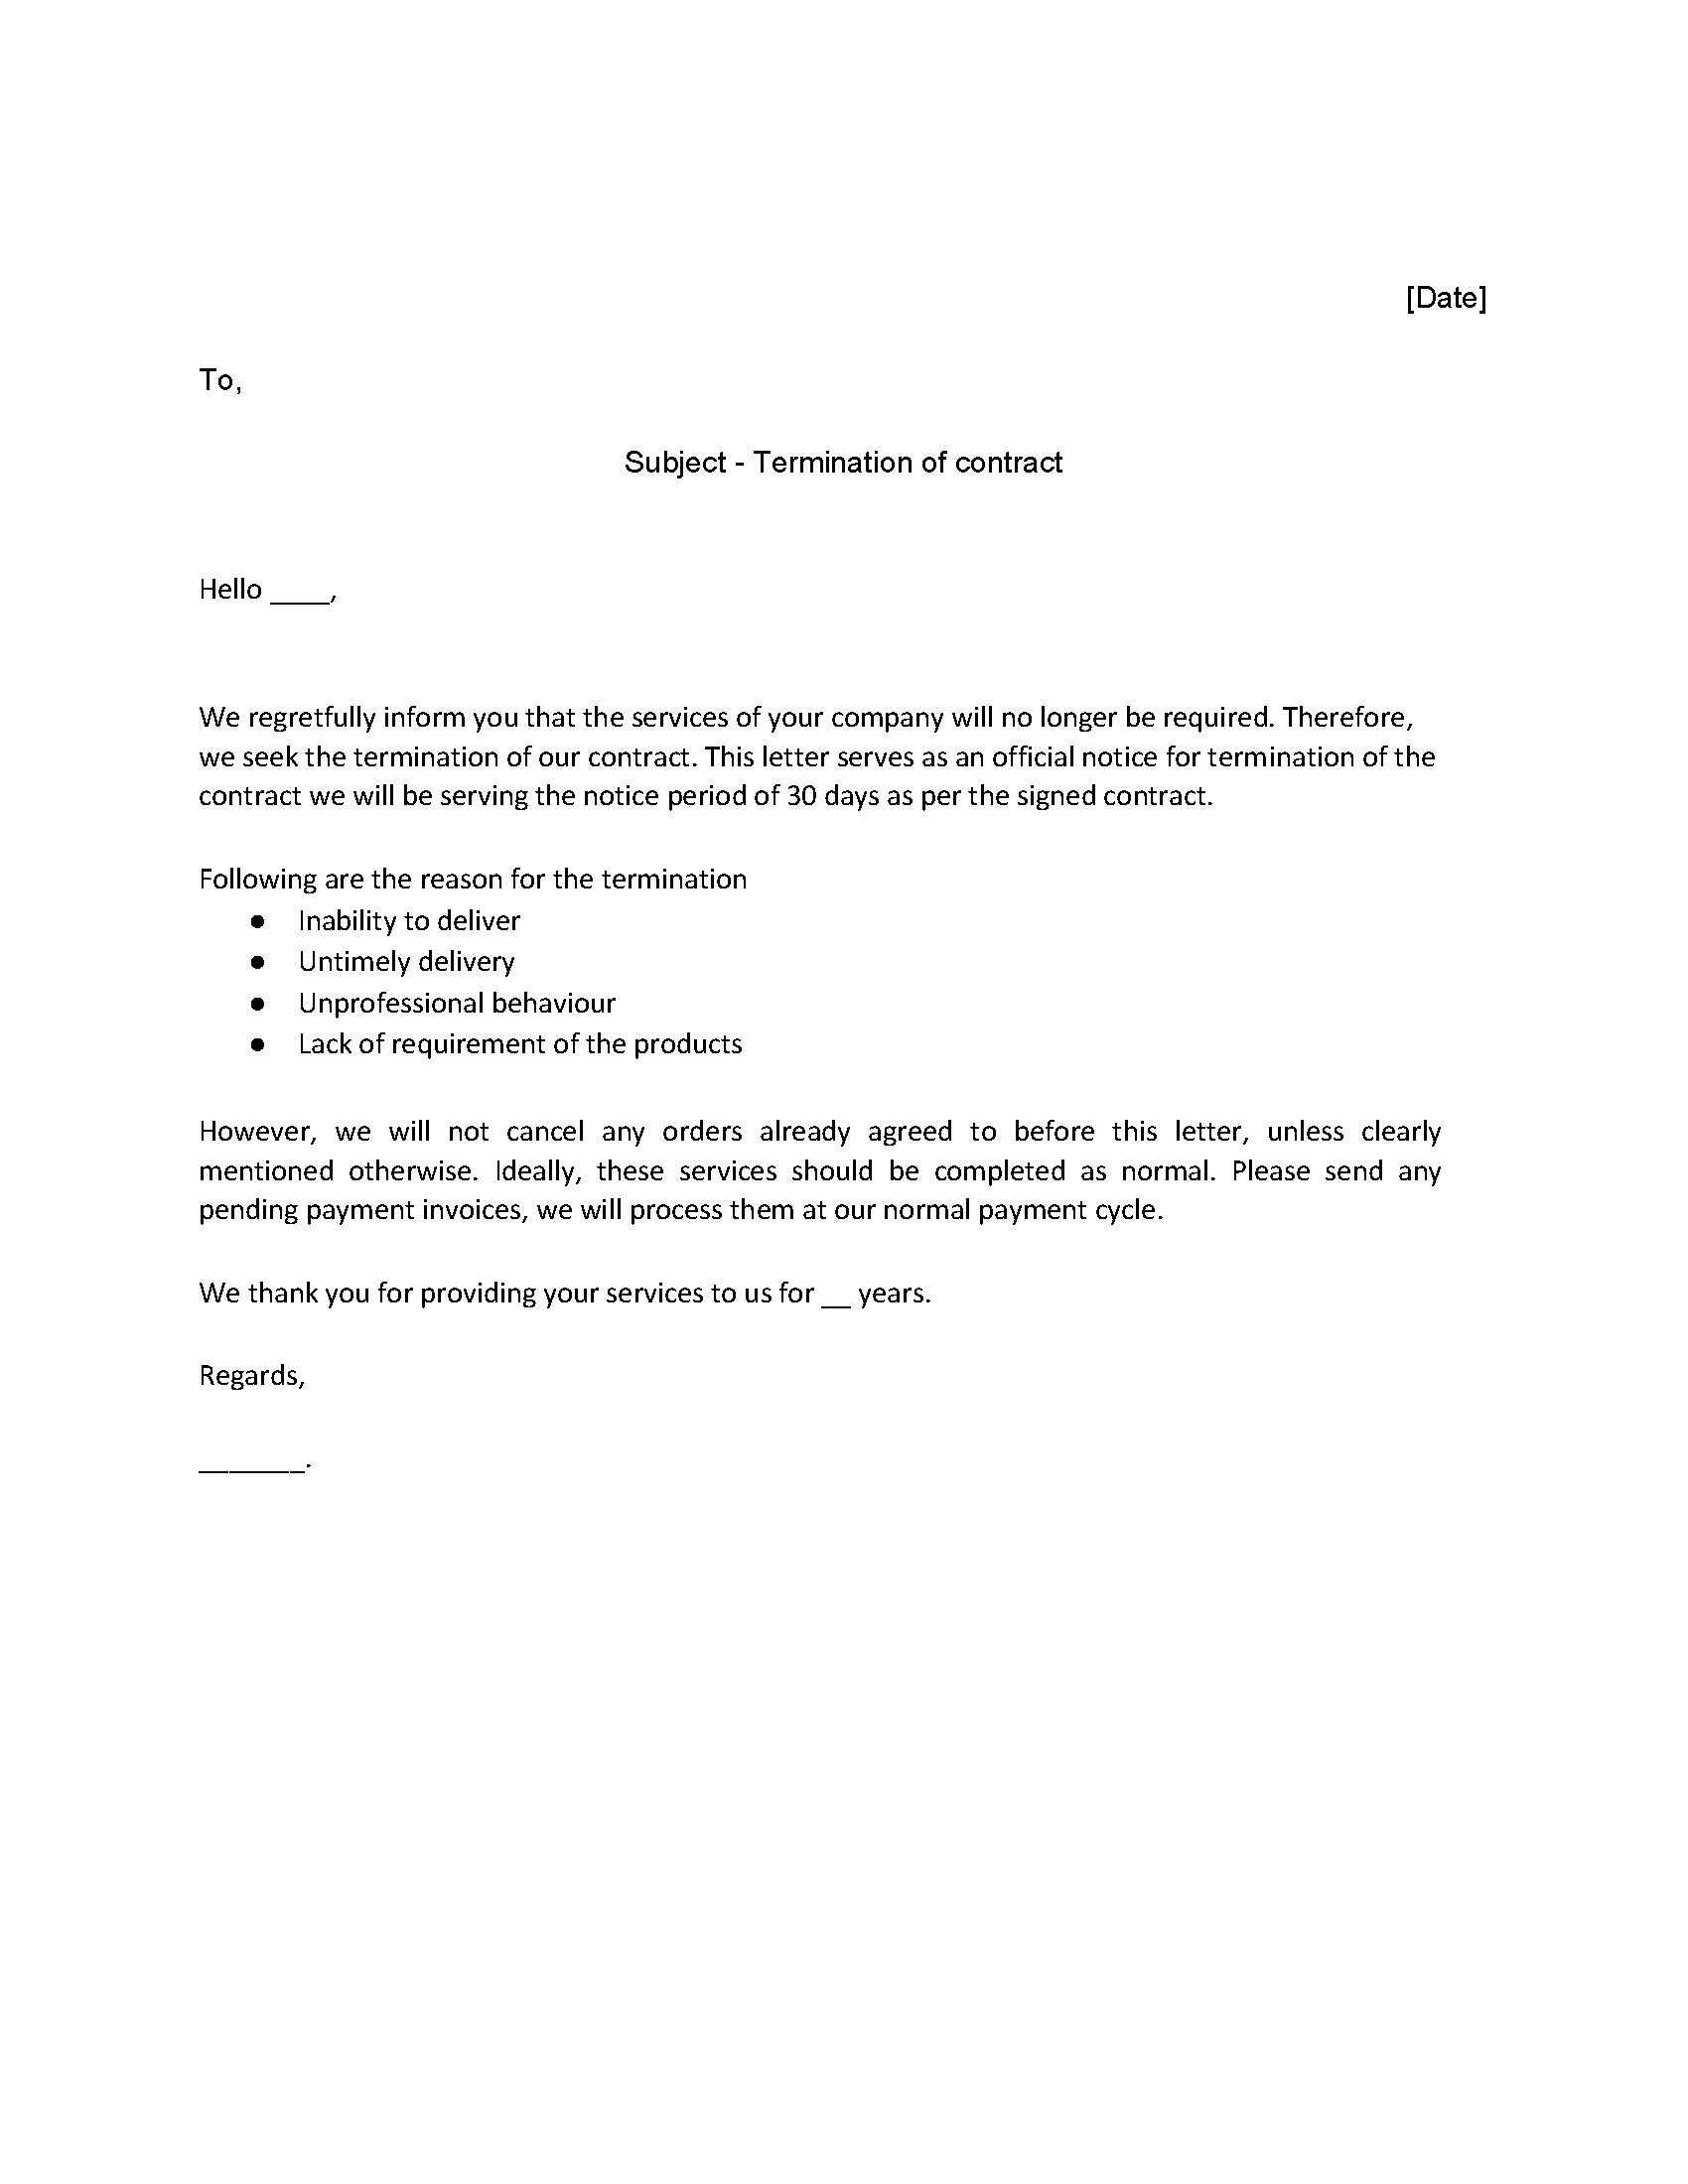 8 - Contract Termination Letter